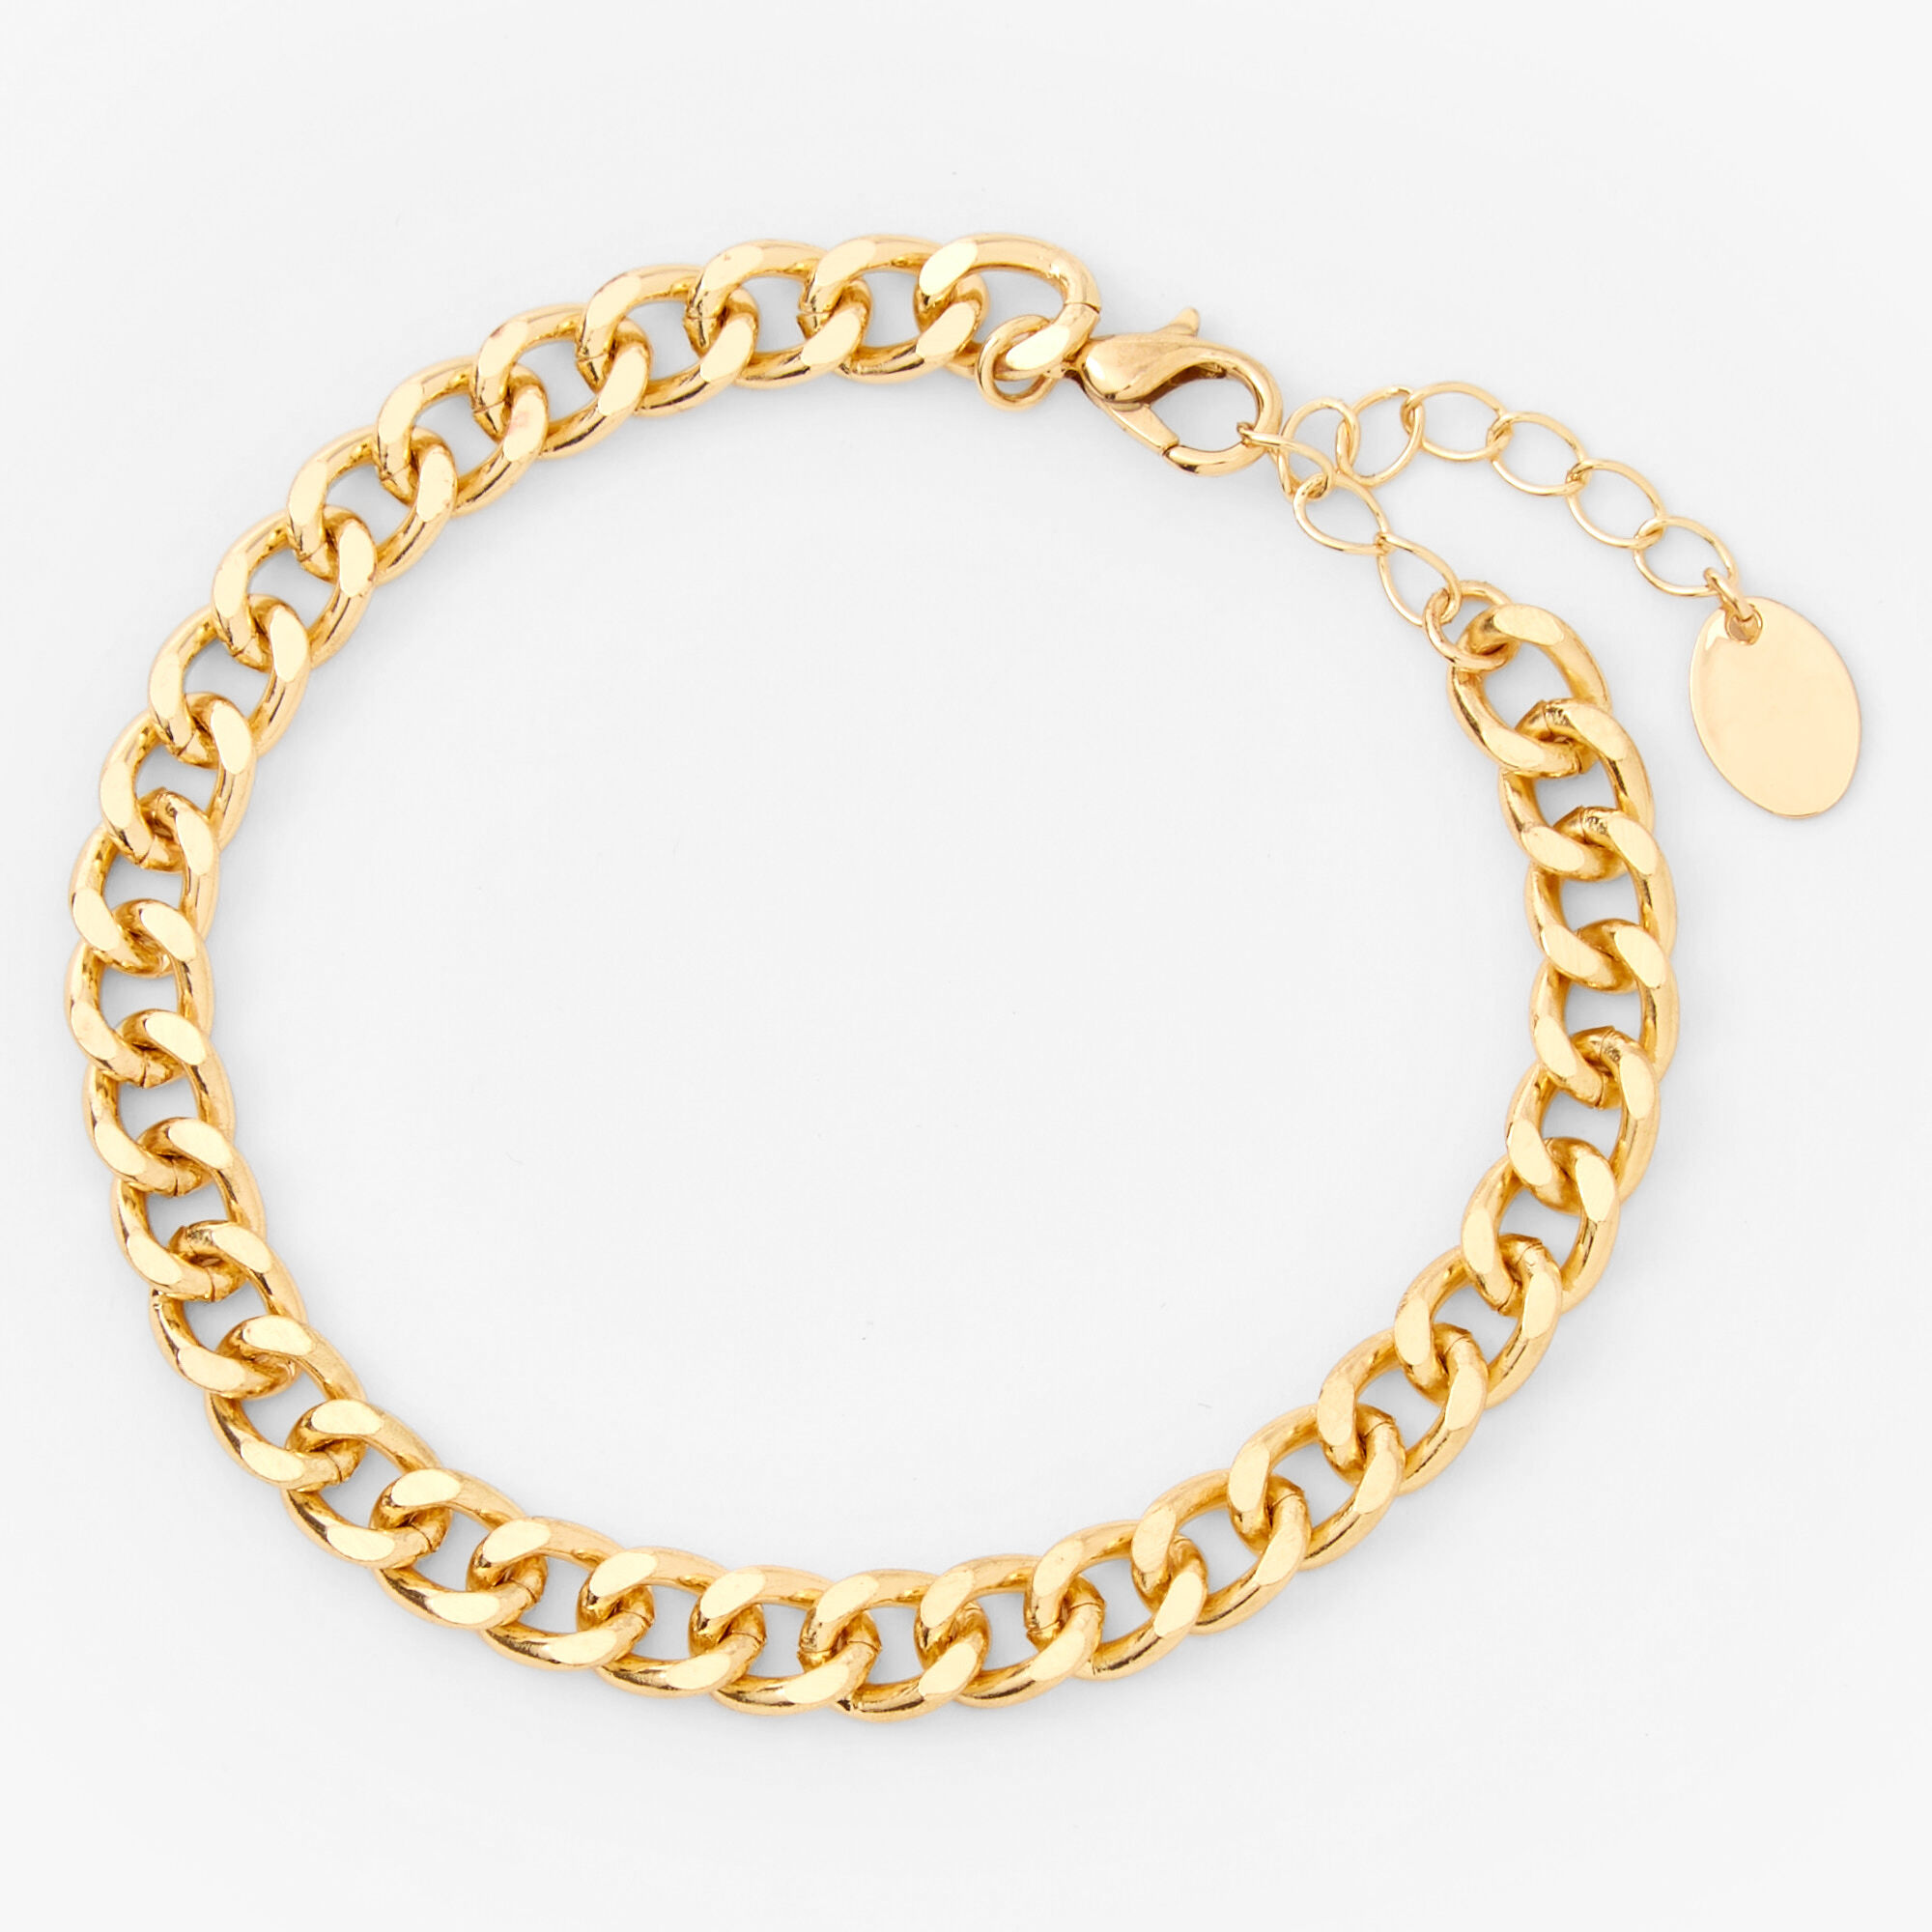 Buy Three Layered Gold Plated Link Chain Bracelet Online At Best Price @  Tata CLiQ